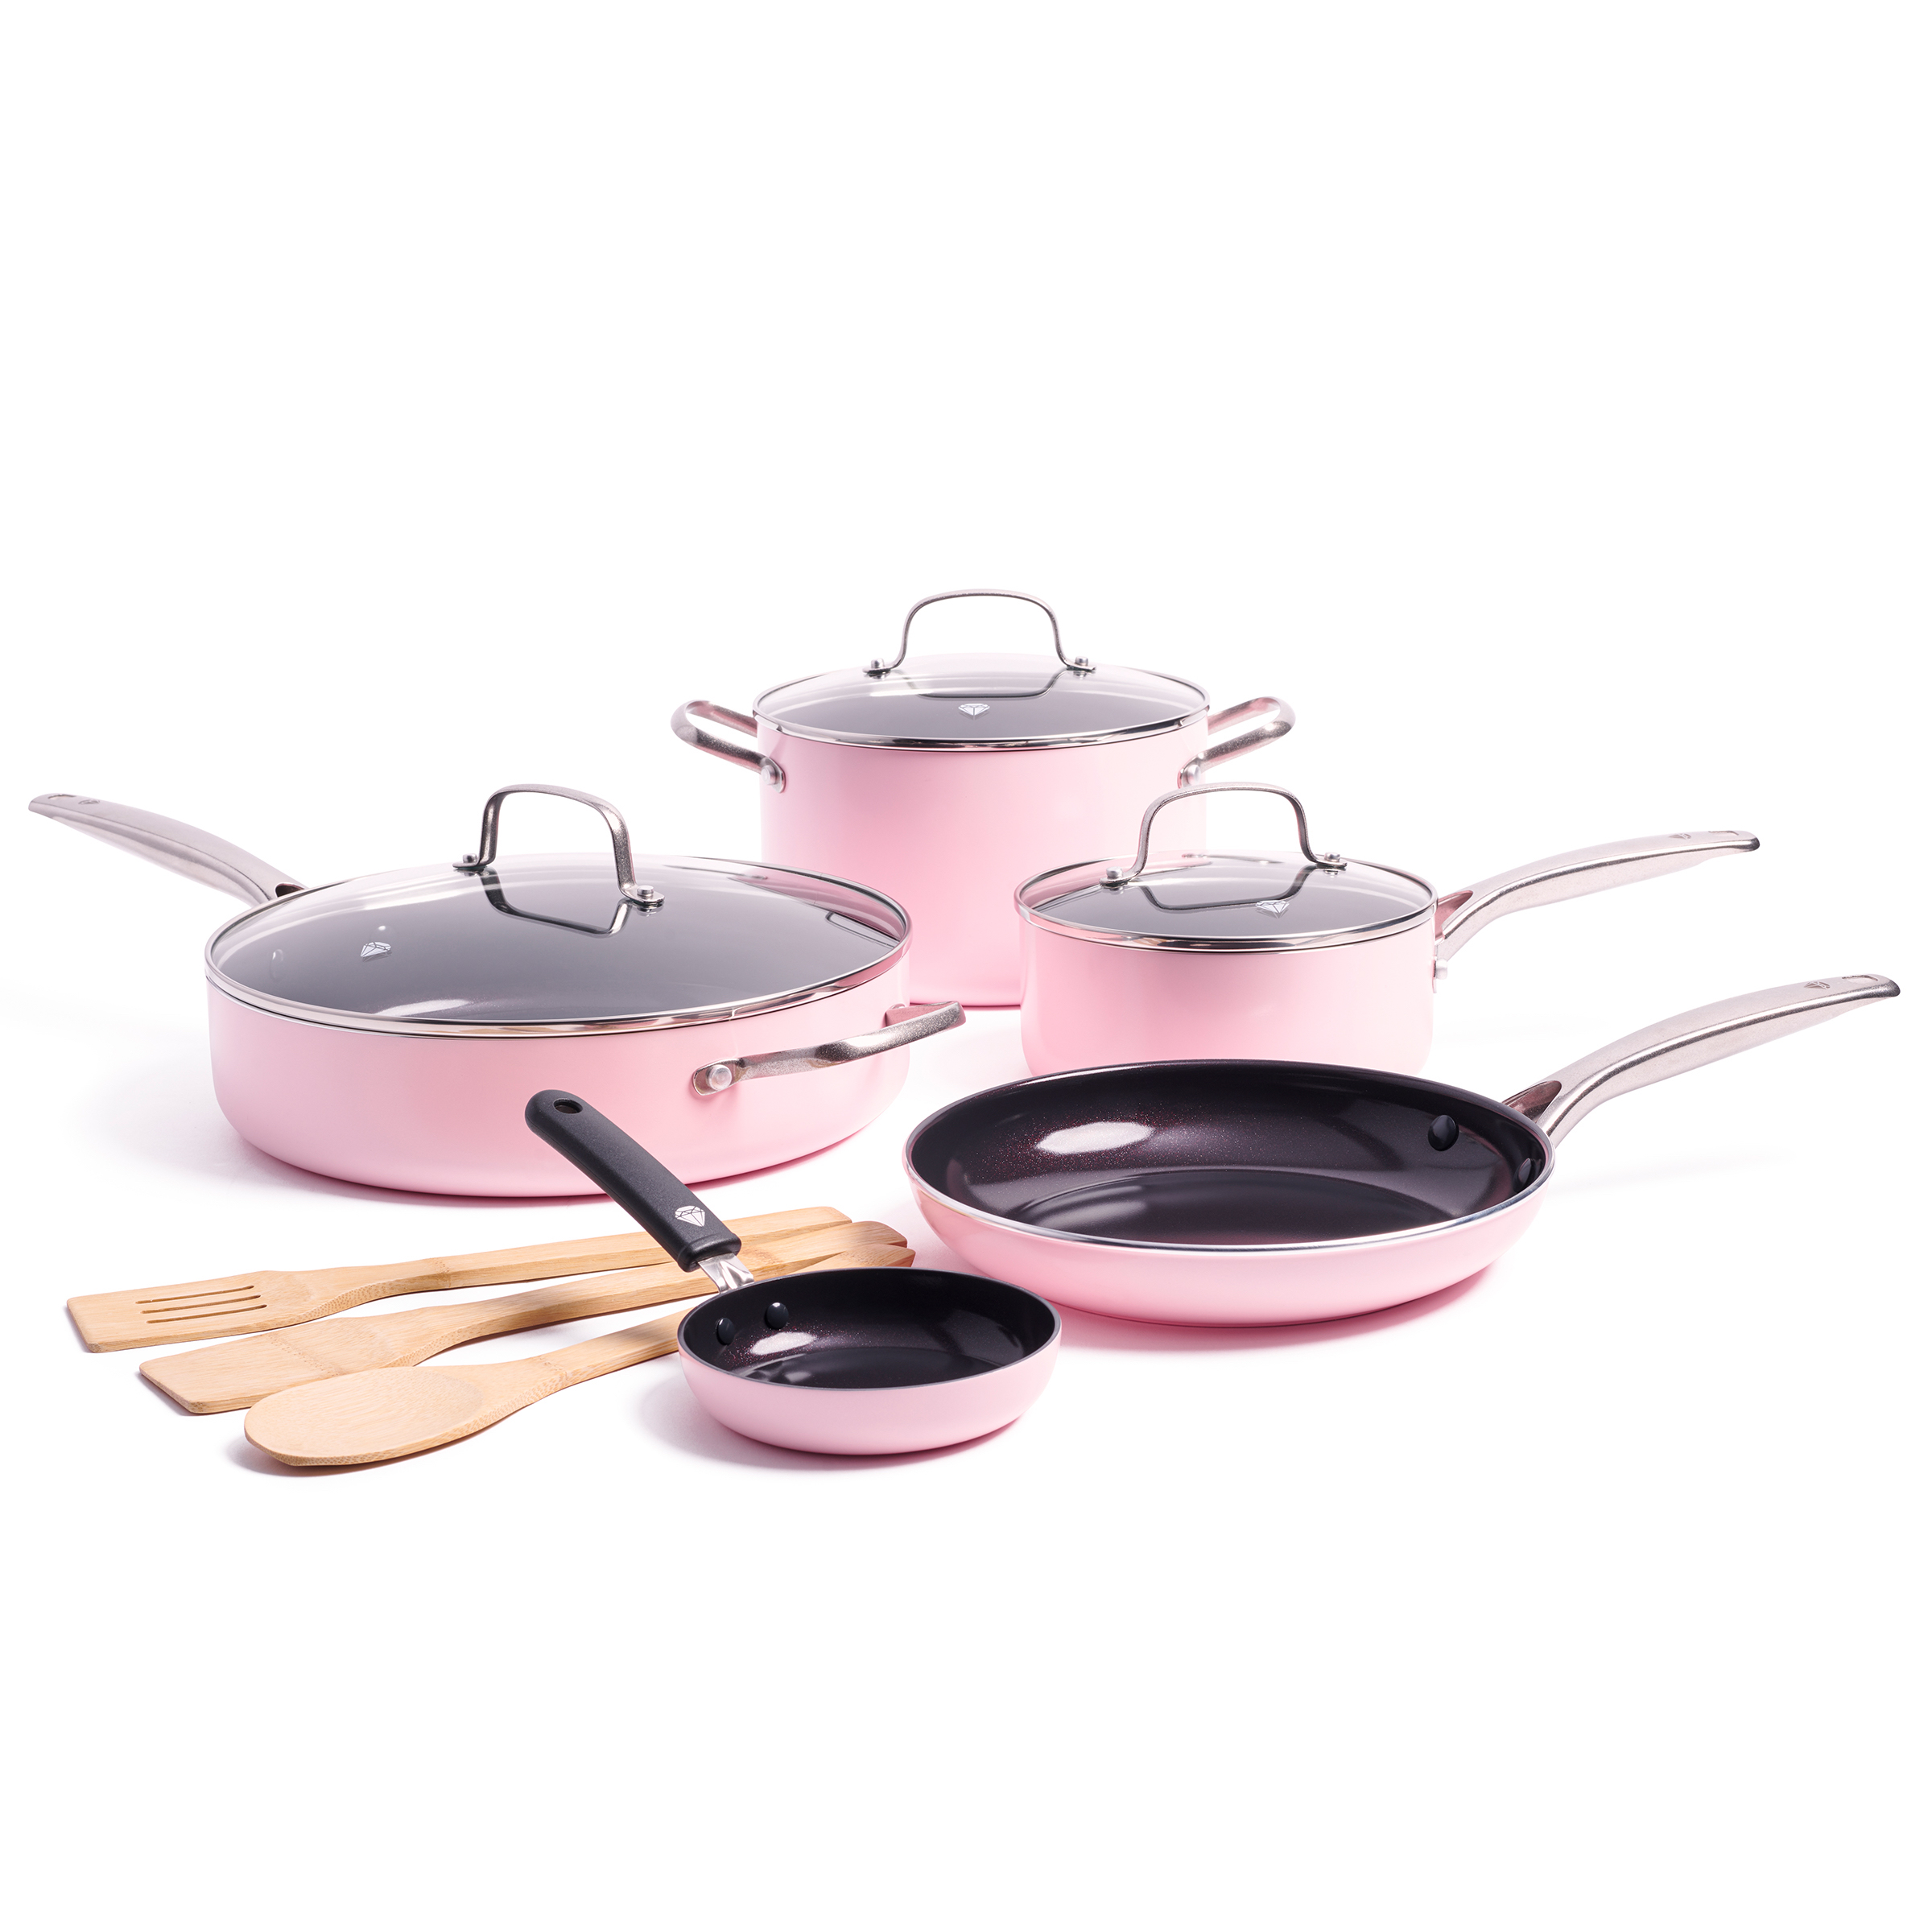 Blue Diamond, Pink Limited Edition Nonstick Ceramic 11-Piece Cookware Set - image 1 of 8